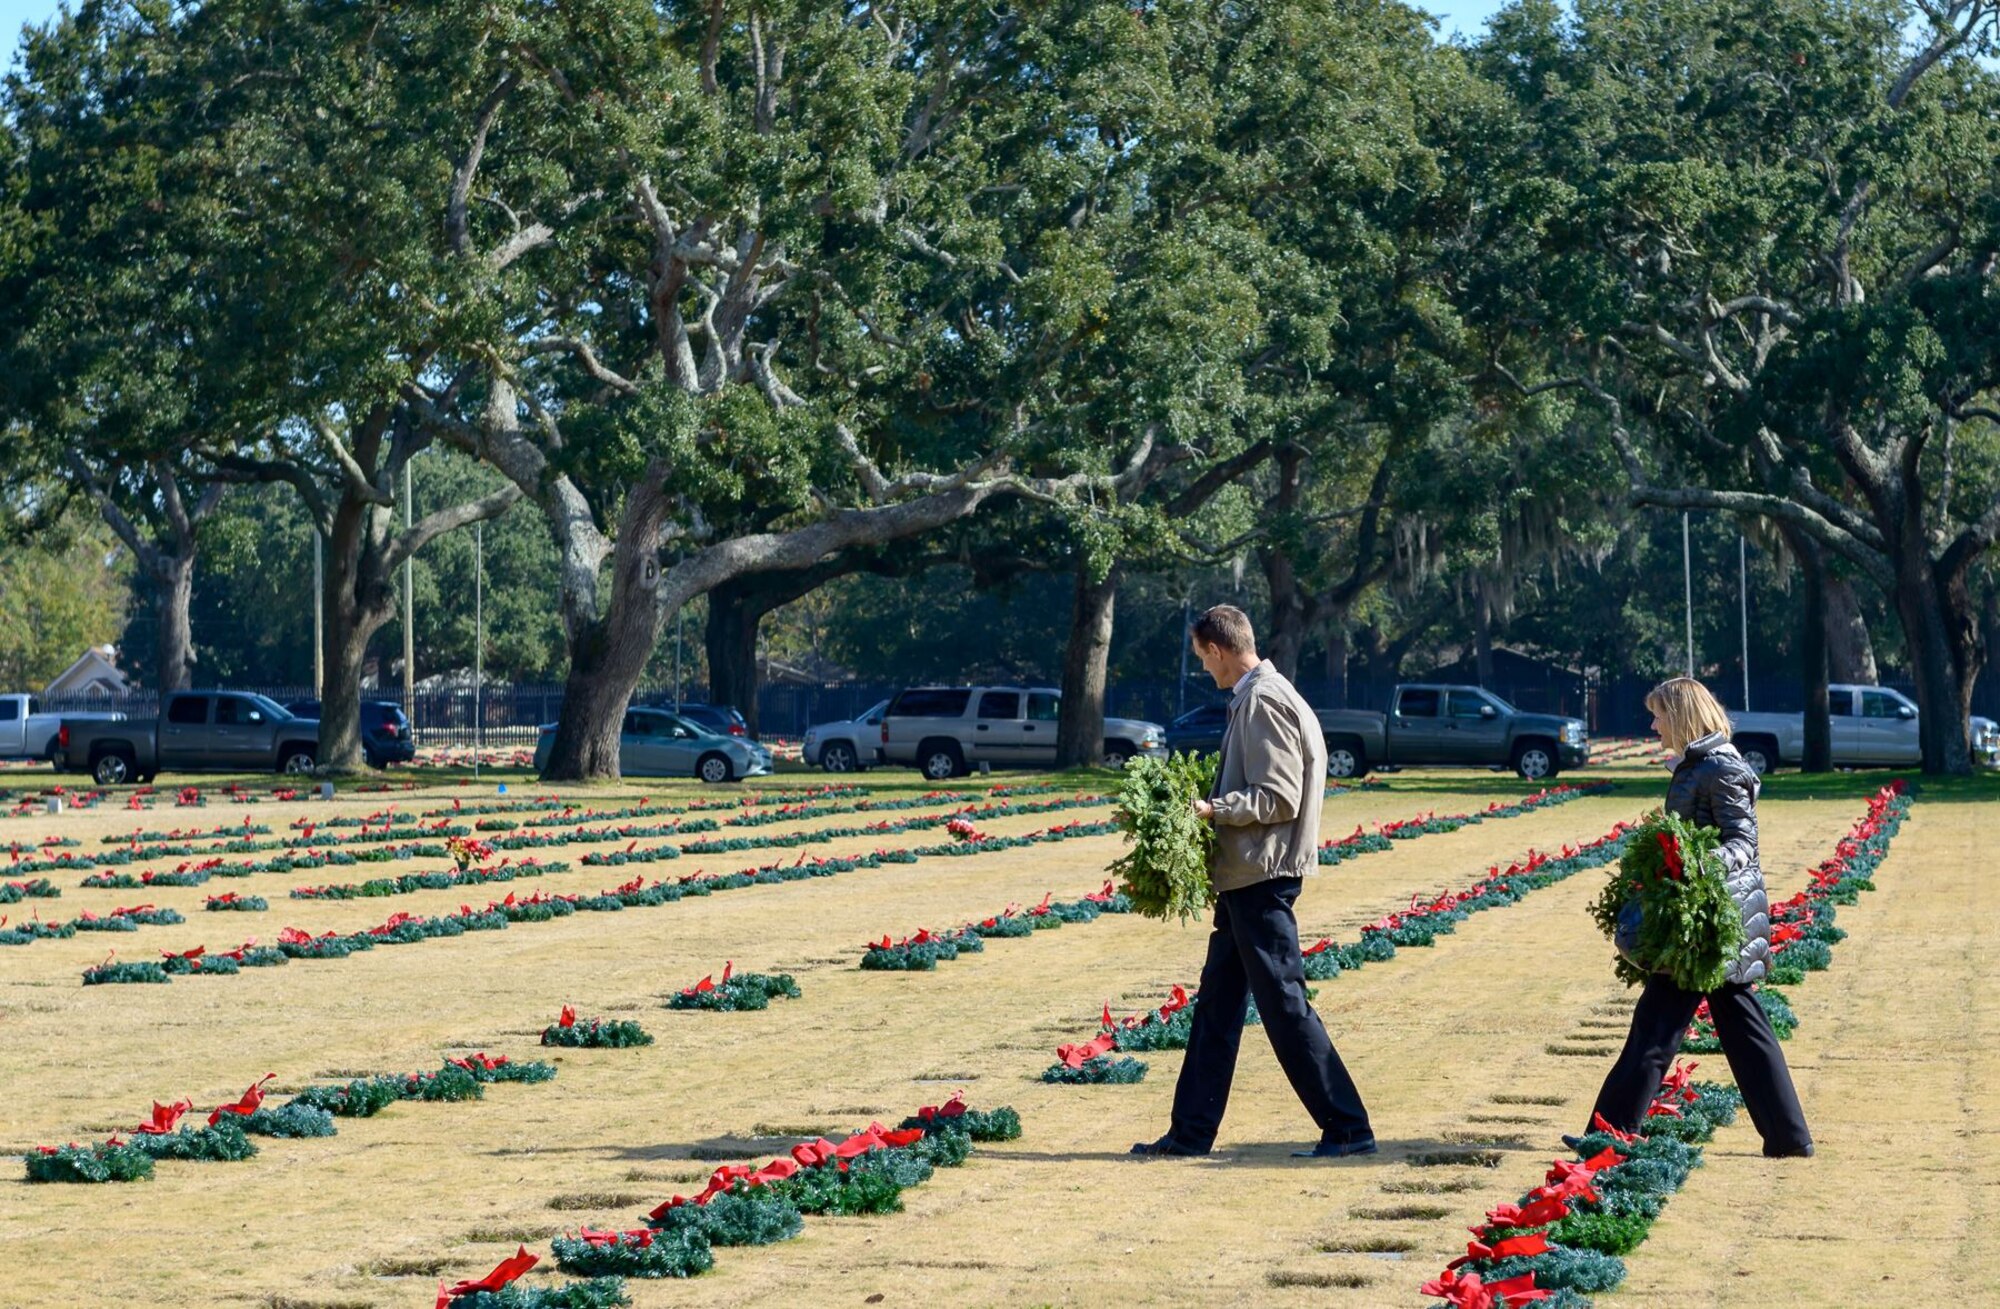 Local volunteers place wreaths at headstones during the Wreaths Across America ceremony at the Biloxi National Cemetery Dec. 16, 2017, in Biloxi, Mississippi. Wreaths Across America, a non-profit organization, was formed as an extension of the Arlington Wreath Project. The Arlington Wreath program was started by Morrill Worcester in 1992 with the donation and laying of 5000 Christmas wreaths to Arlington National Cemetery. Keesler leadership attended the event. (U.S. Air Force photo by André Askew)